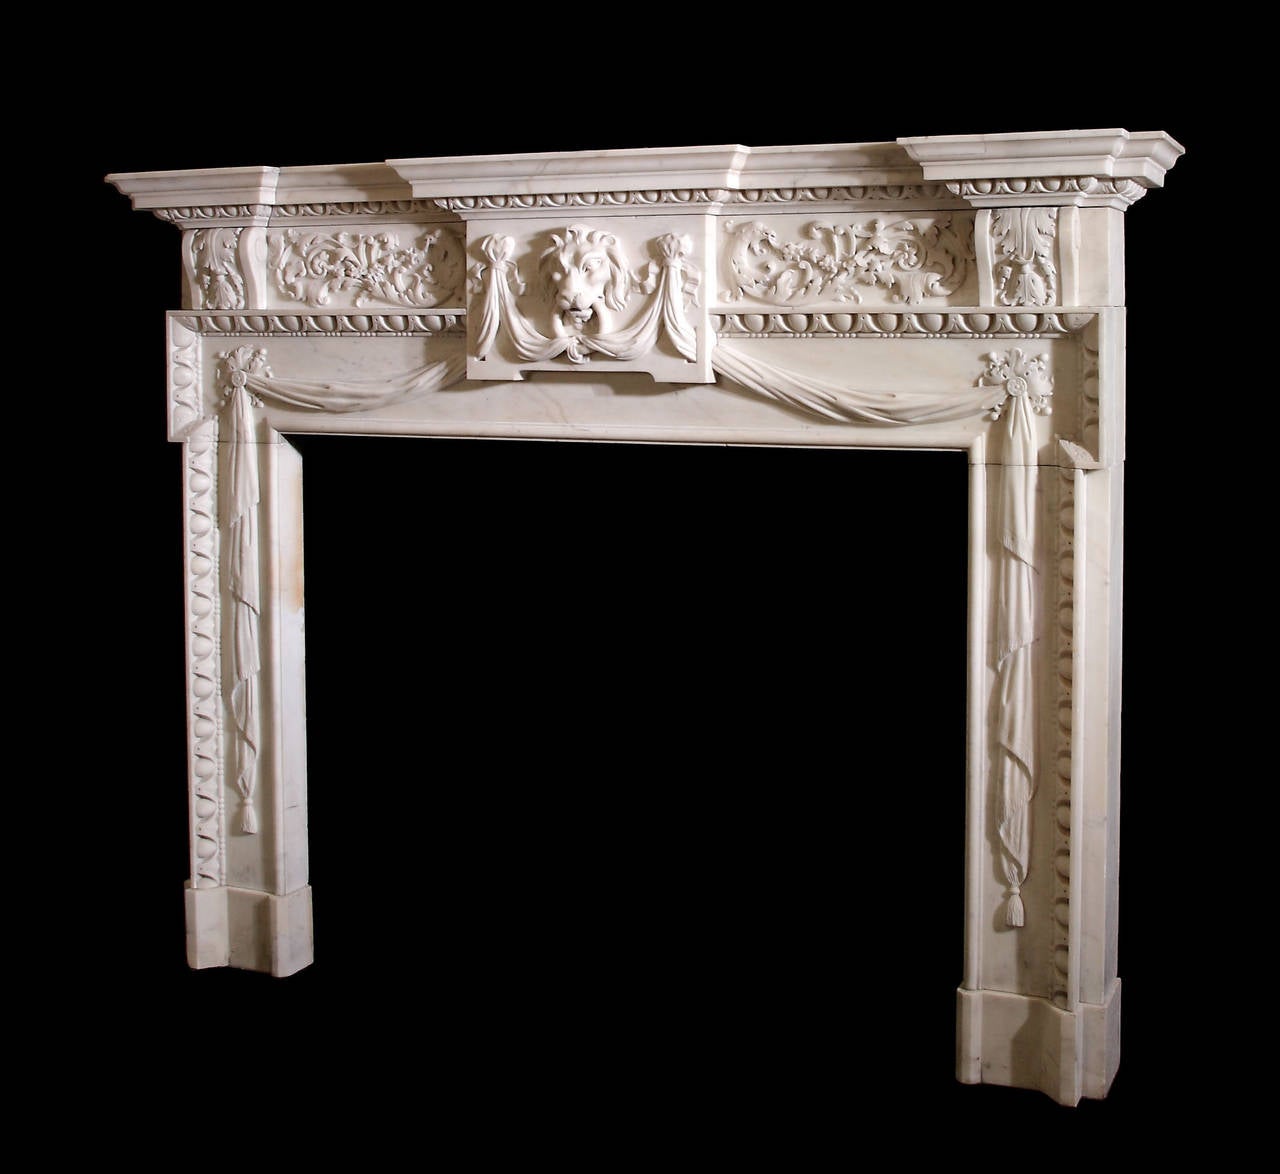 18th Century Palladian Mantel with Detail Carving and Rococo Influence 1